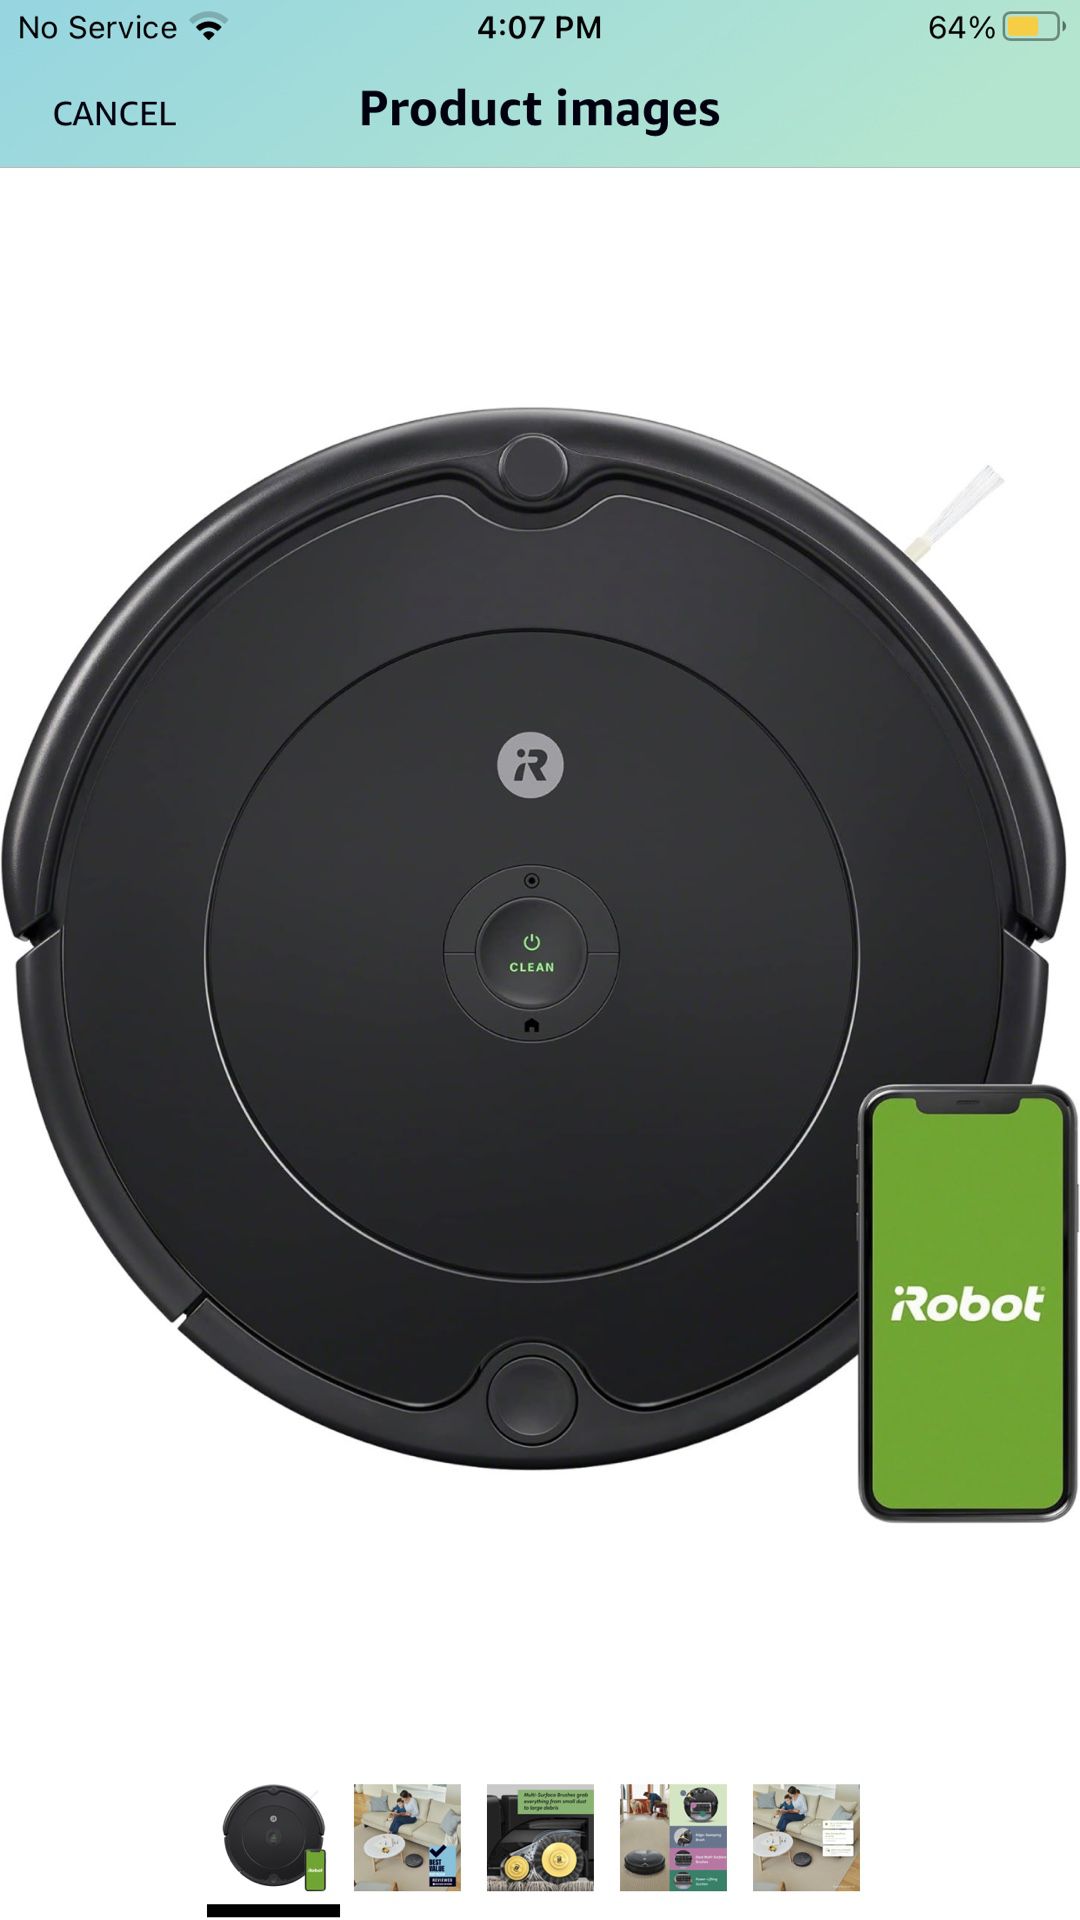 iRobot Roomba 692 Robot Vacuum - Wi-Fi Connectivity, Personalized Cleaning Recommendations, Works with Alexa, Good for Pet Hair, Carpets, Hard Floors,